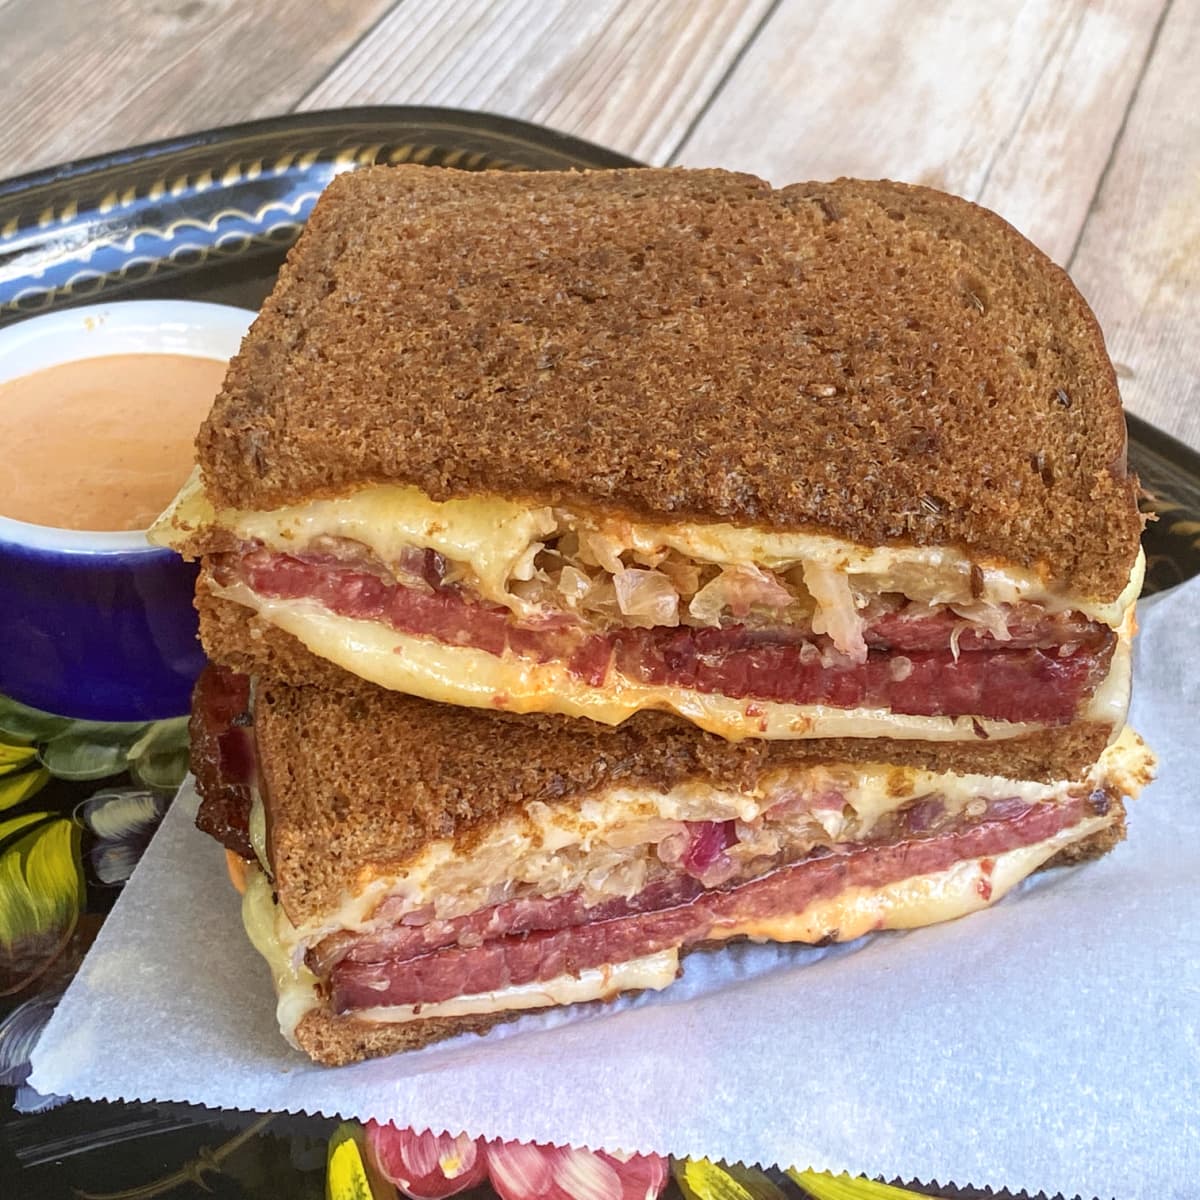 Two halves of a Rueben stacked on parchment, on a Russian black-lacquered tray. Russian dressing in a small service cup in the background.